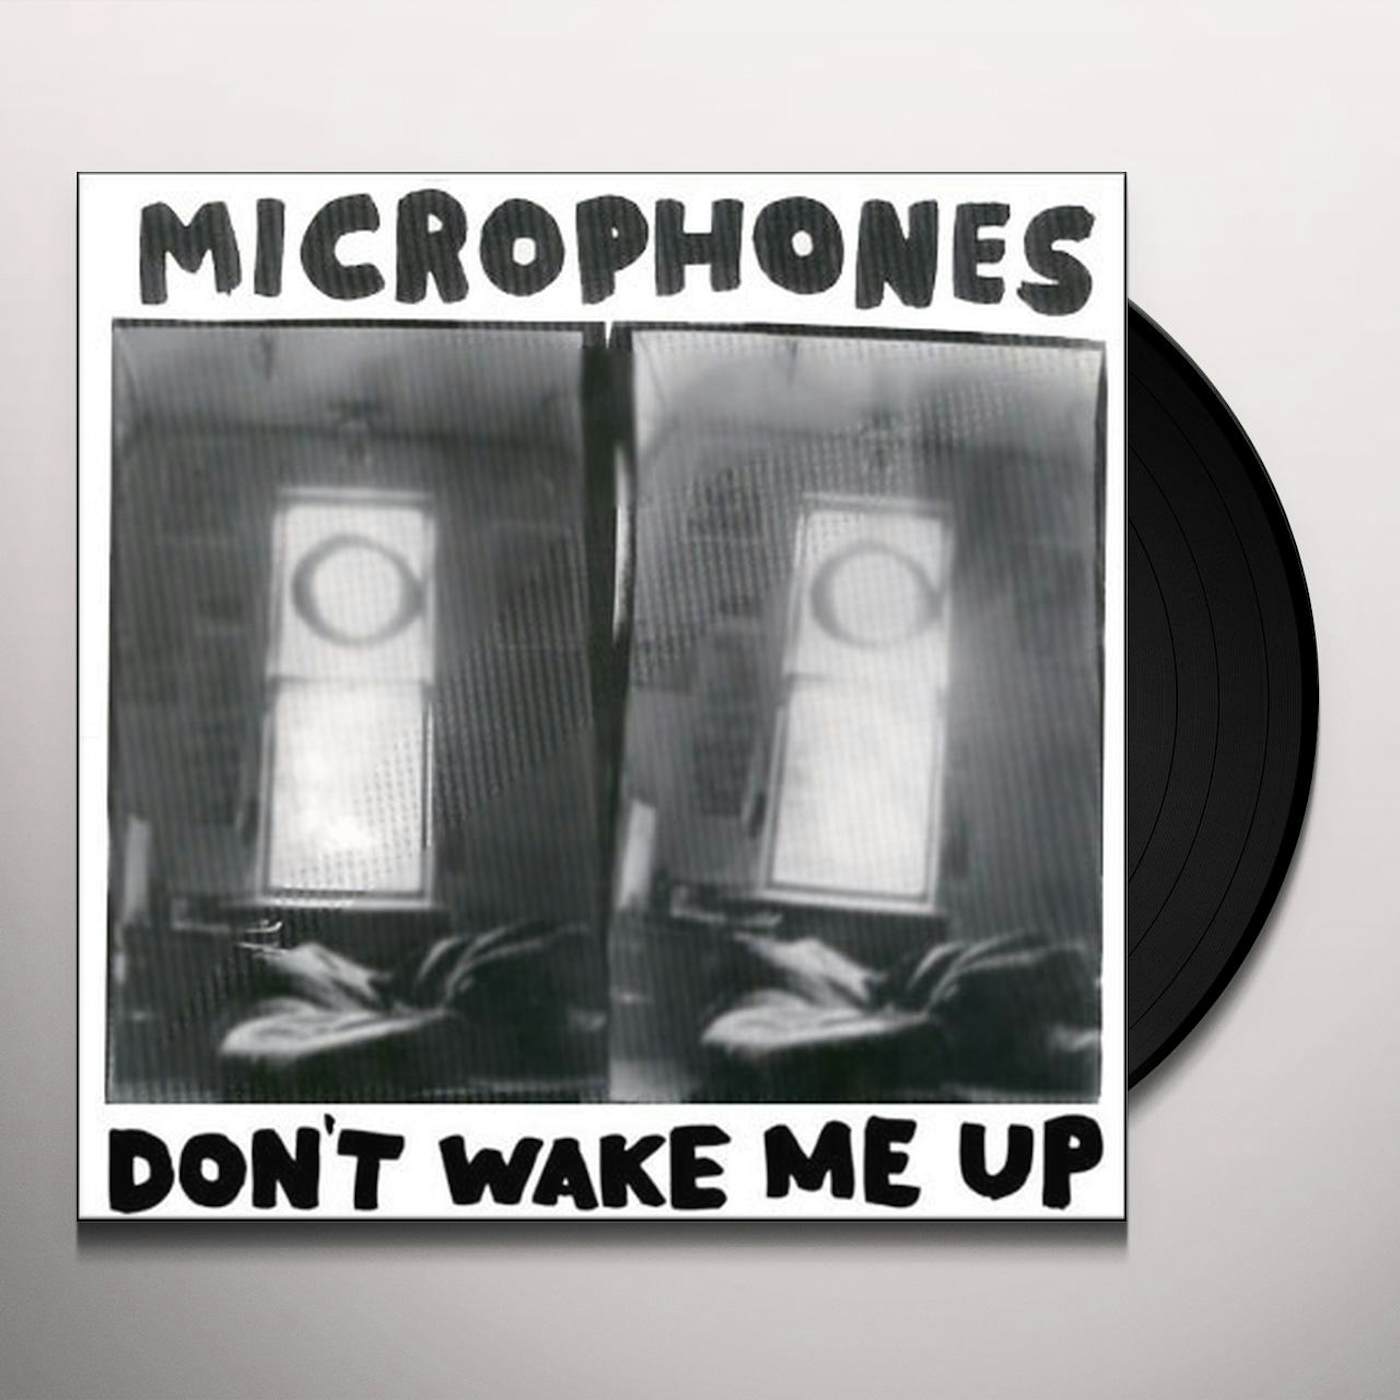 The Microphones Don't Wake Me Up Vinyl Record